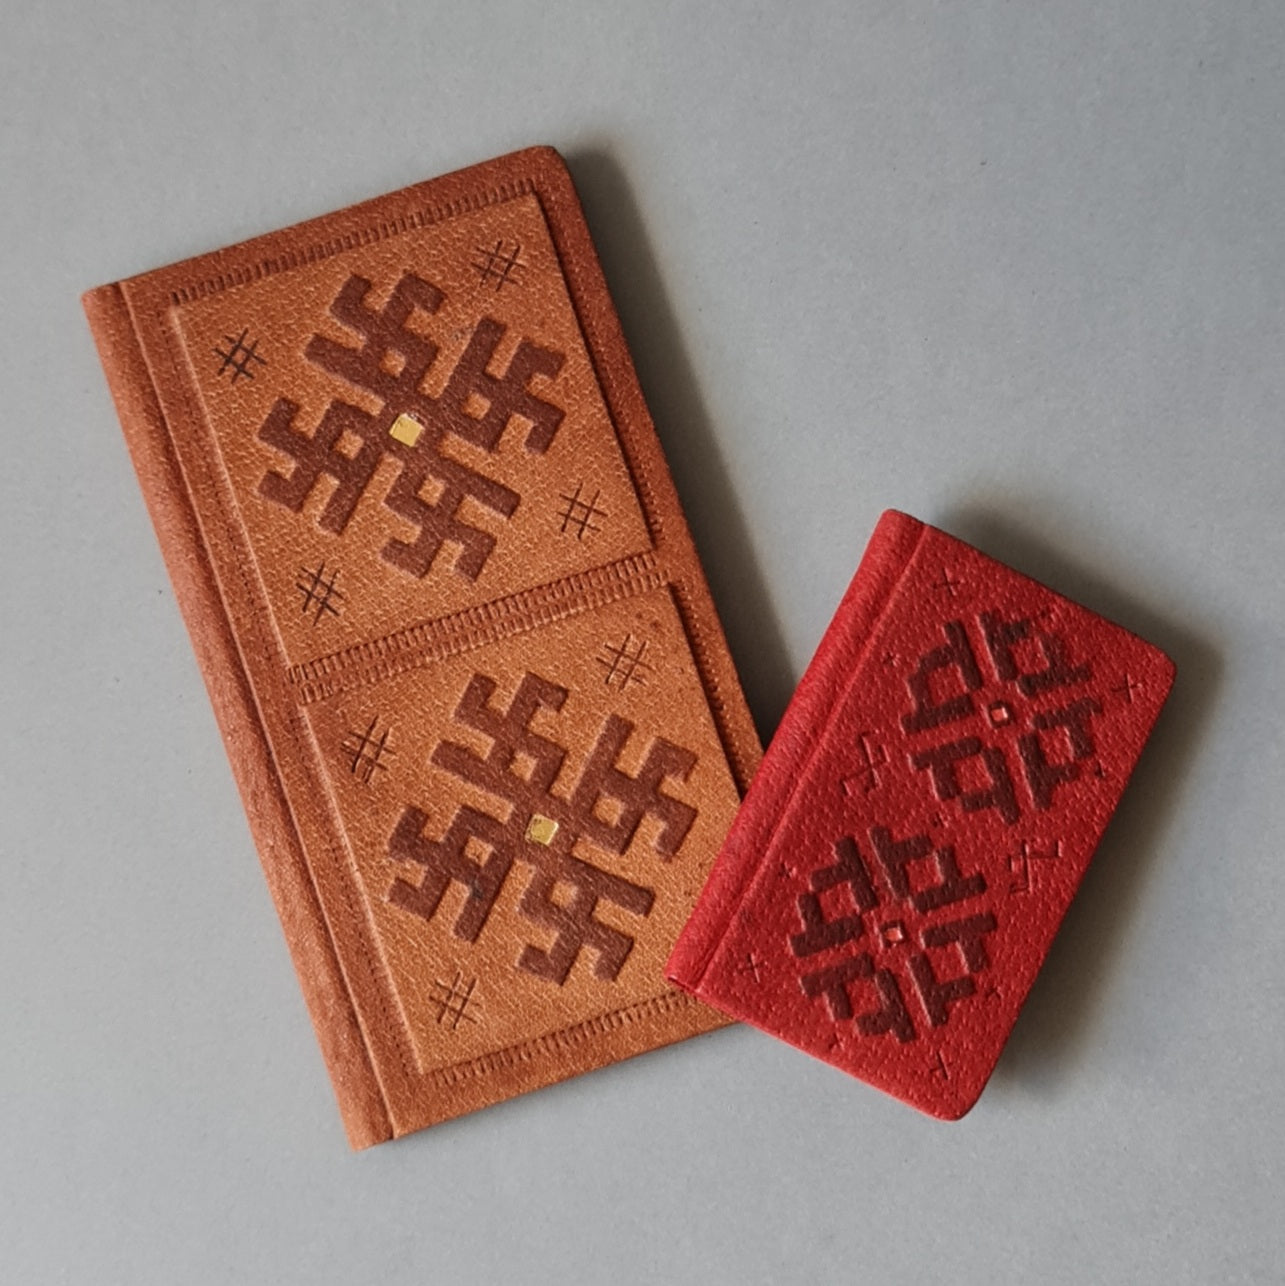 Phone book with Russian alphabet in leather cover. Dark red color with a decorative print. Mini 5.8 x 8.9 x 0.9 cm (MAPL)